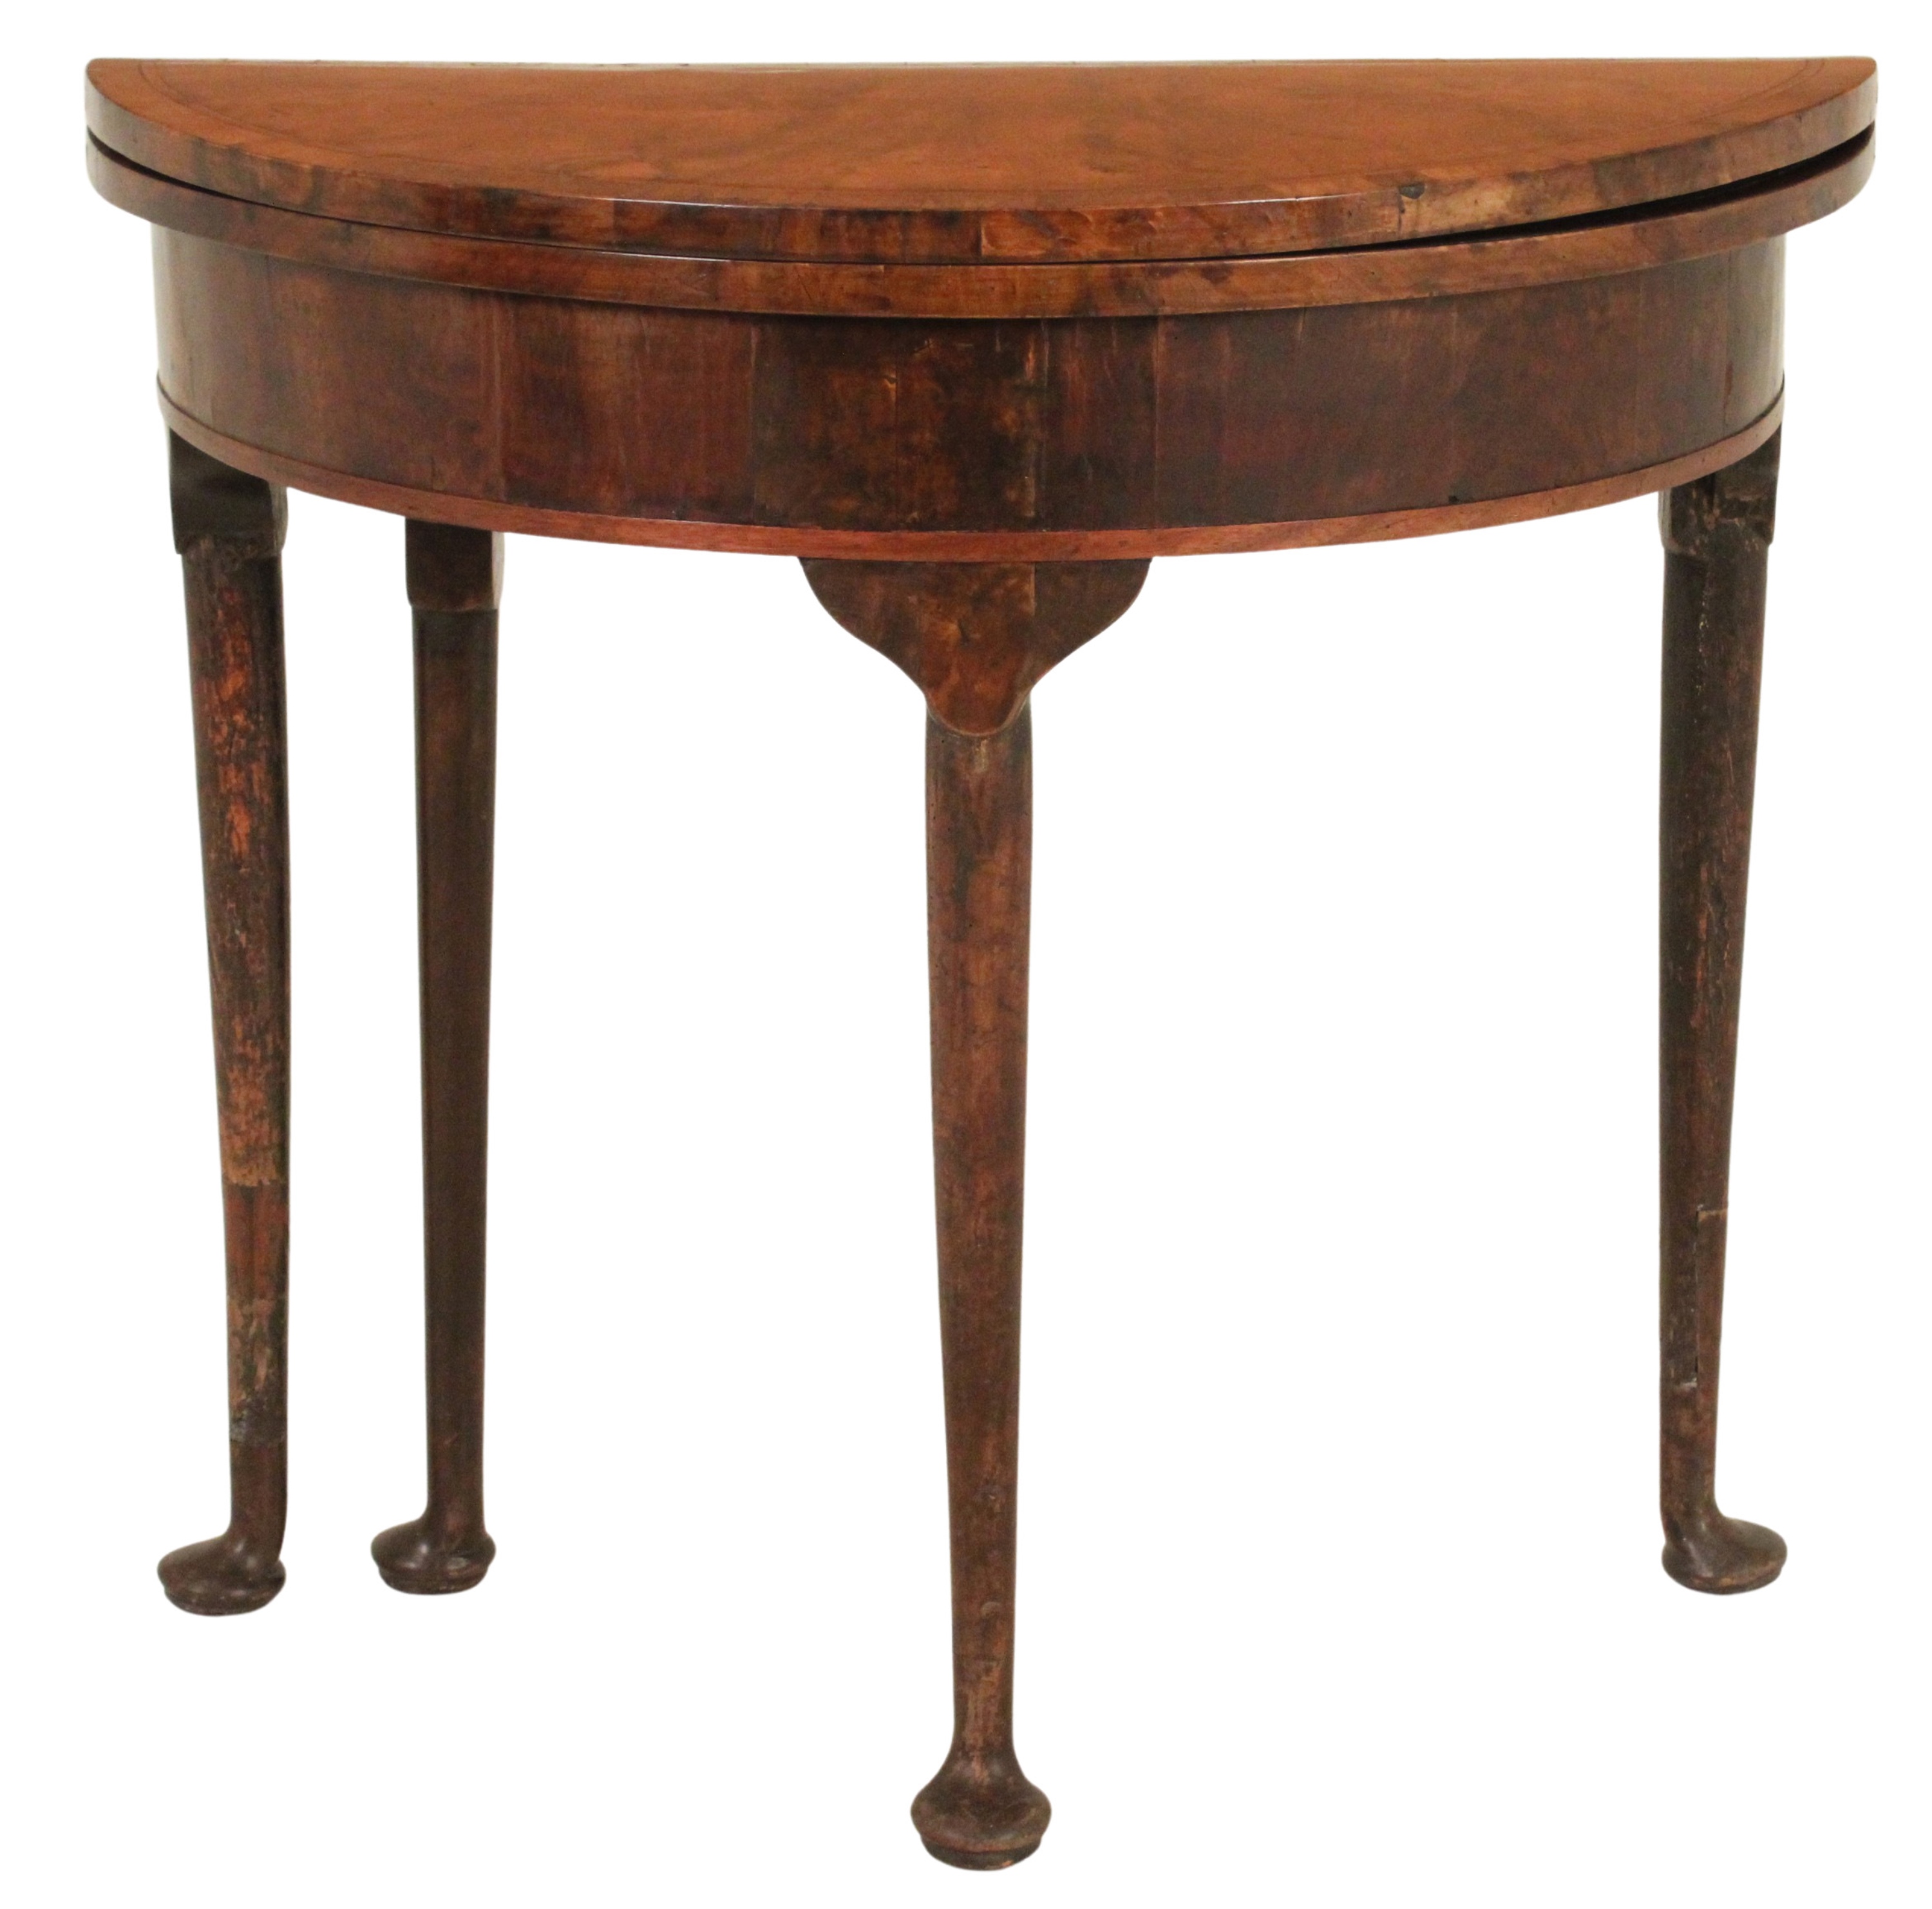 QUEEN ANNE GAME TABLE English walnut 2f8c6d